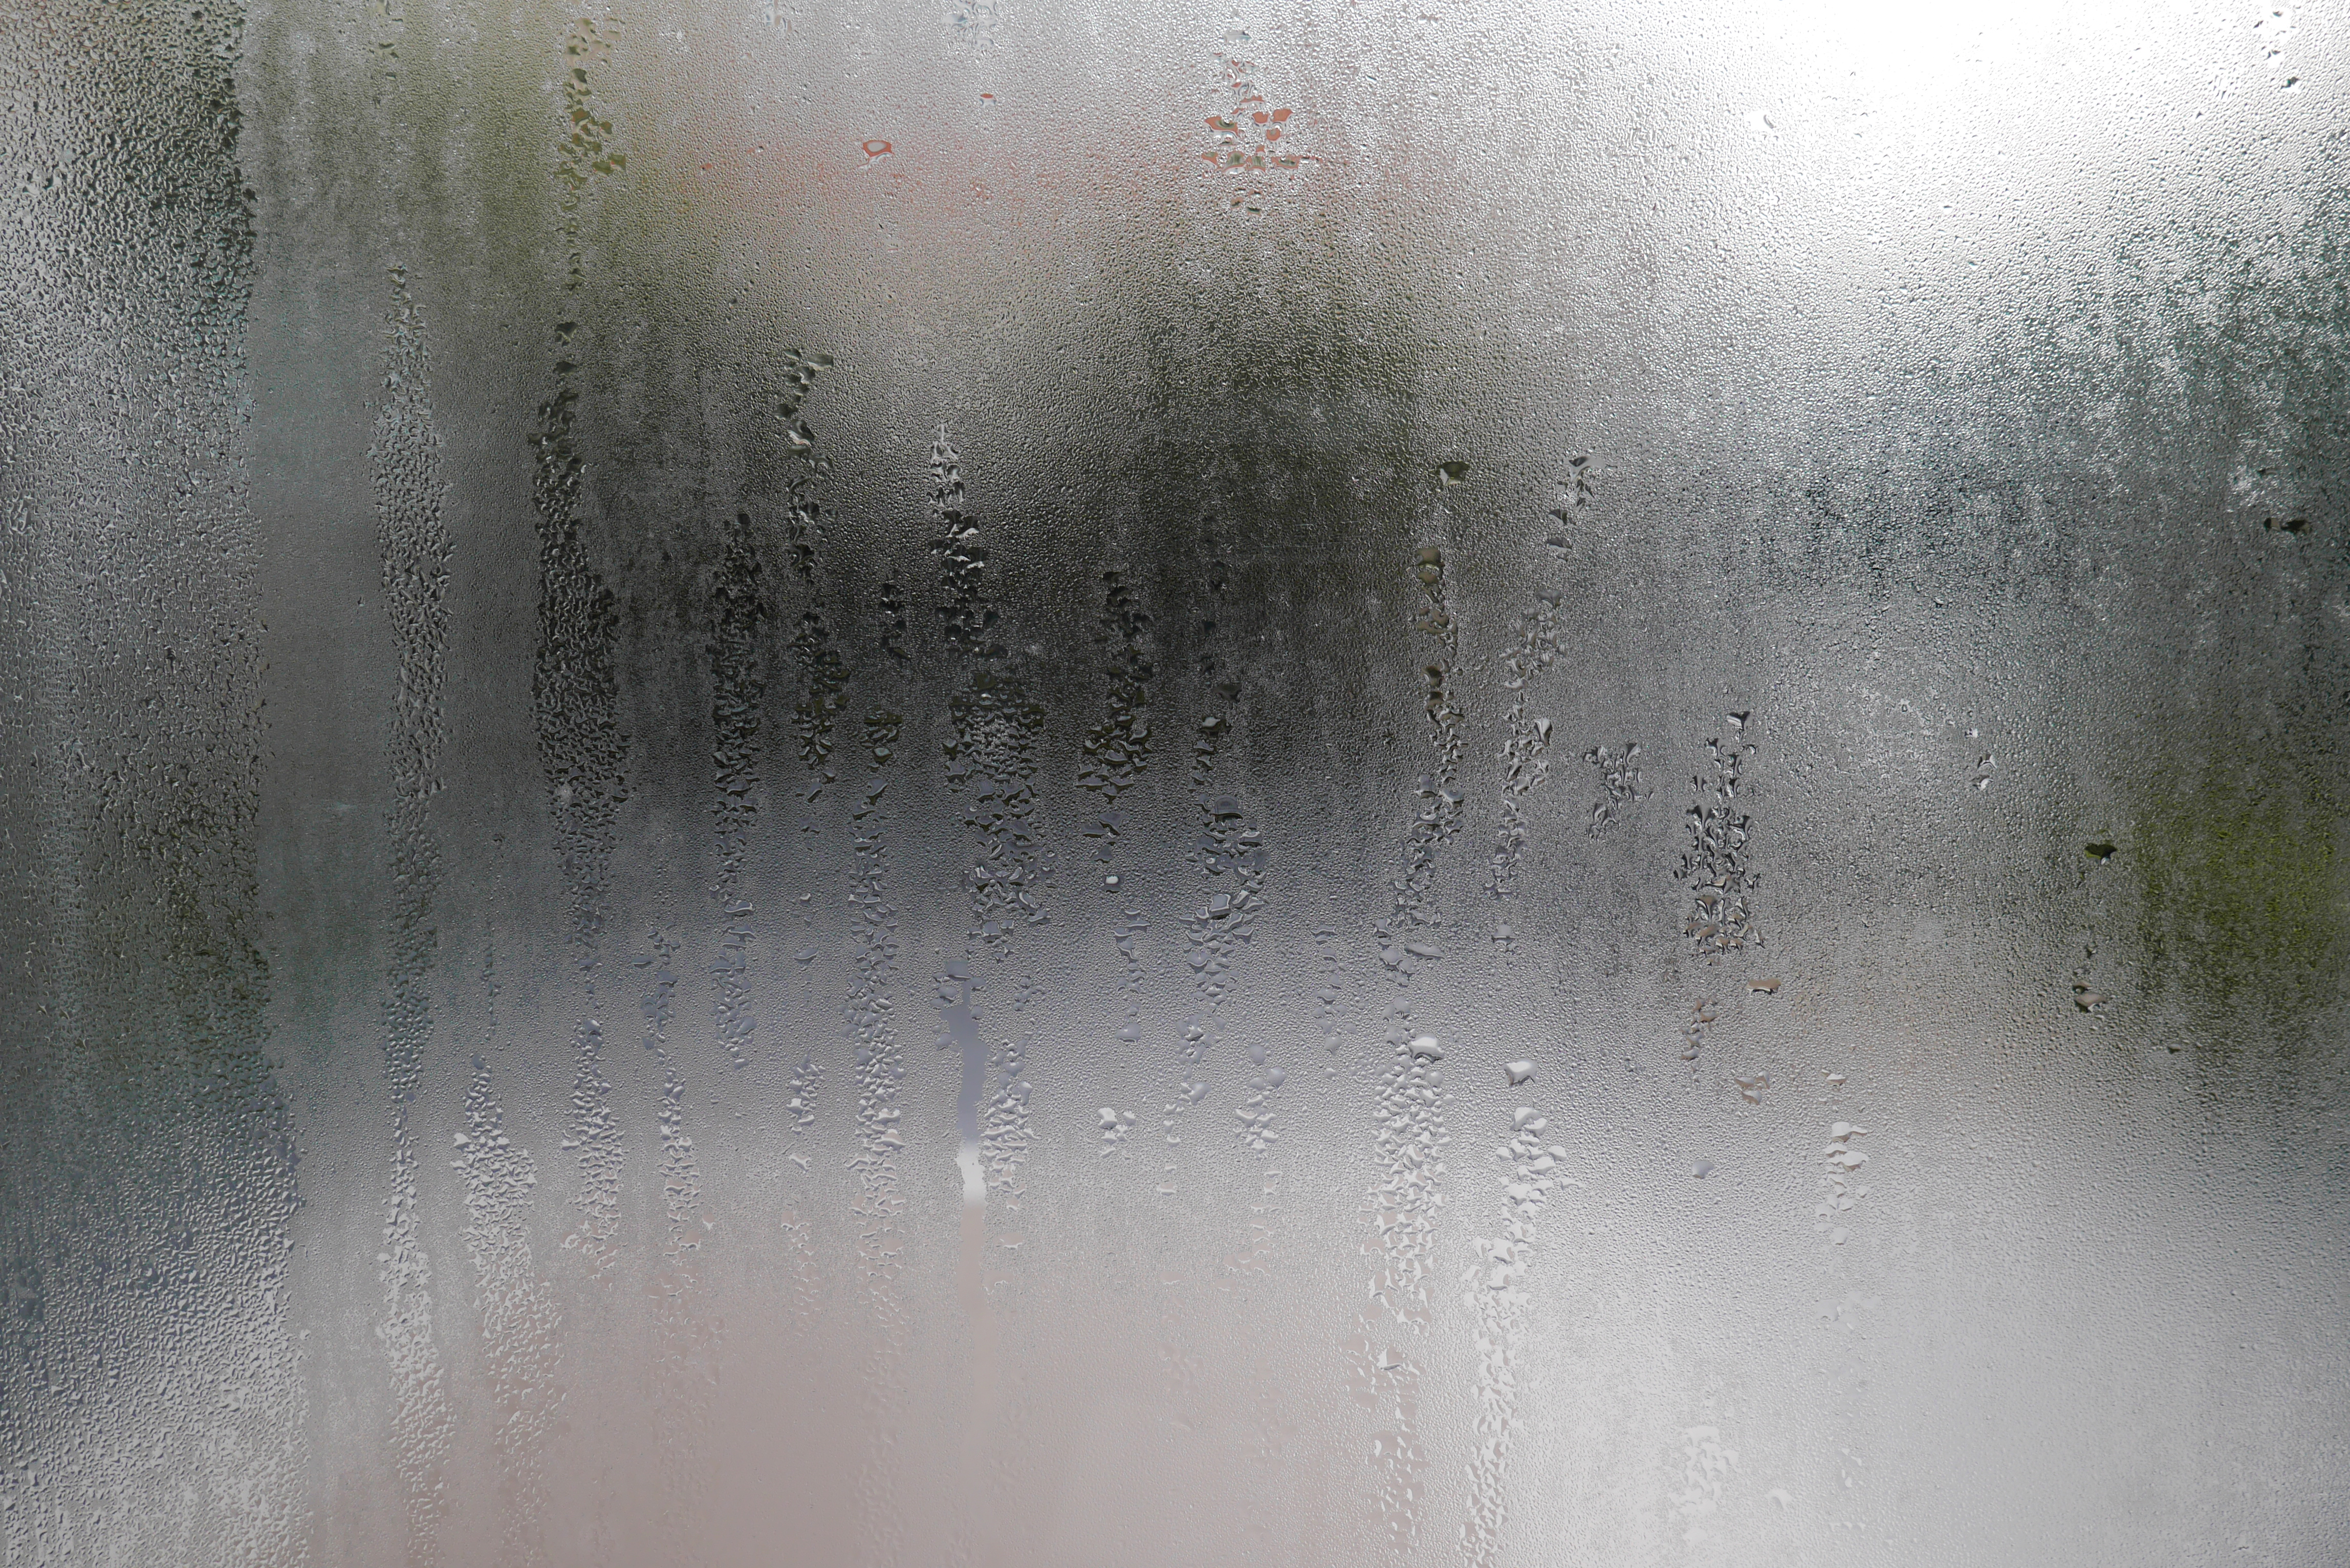 Humidity Indicated by Condensation on Window